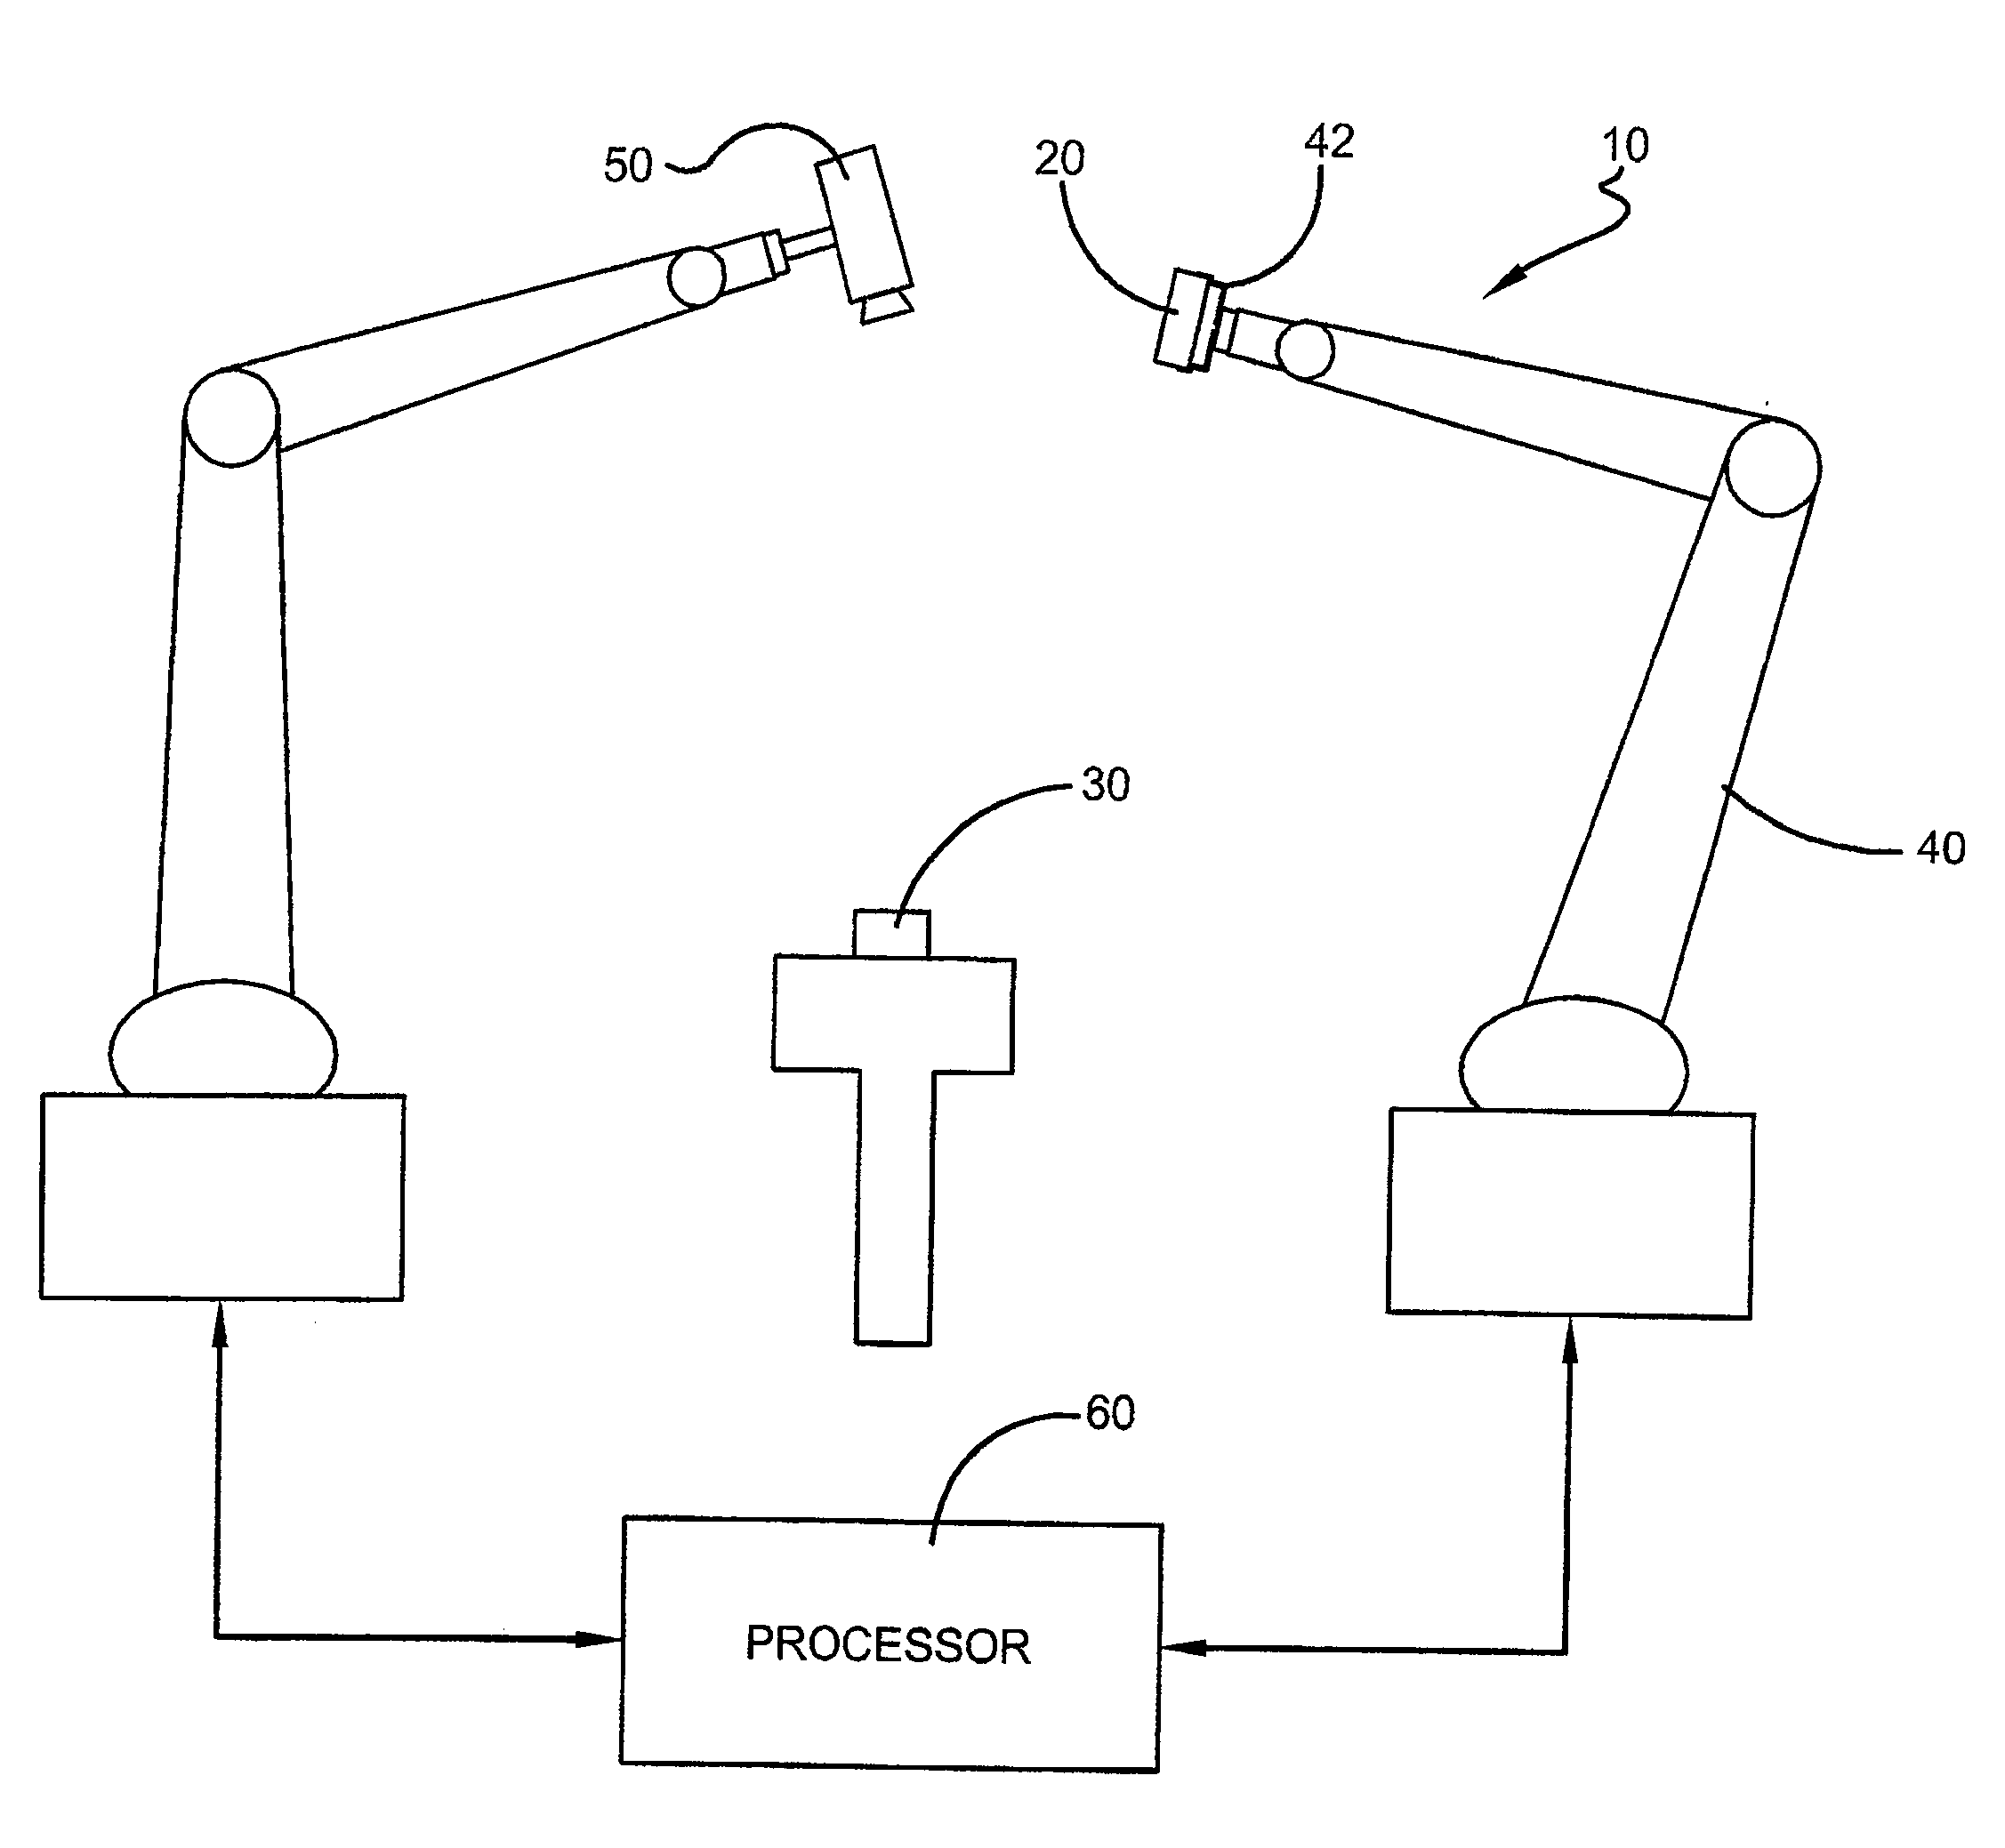 Vision-guided alignment system and method